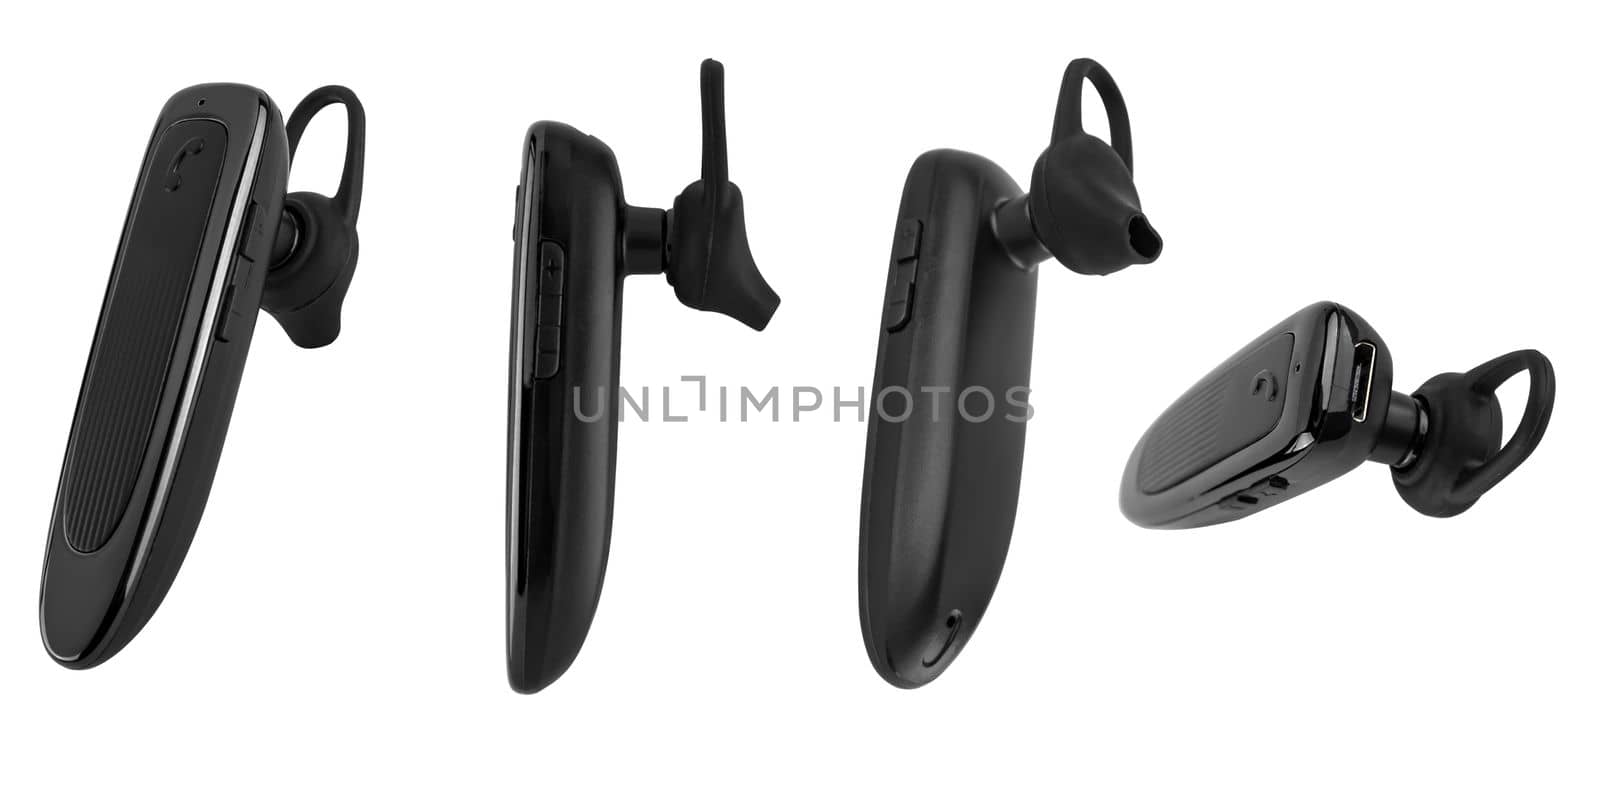 bluetooth headset for the phone, accessory for the phone, on a white background